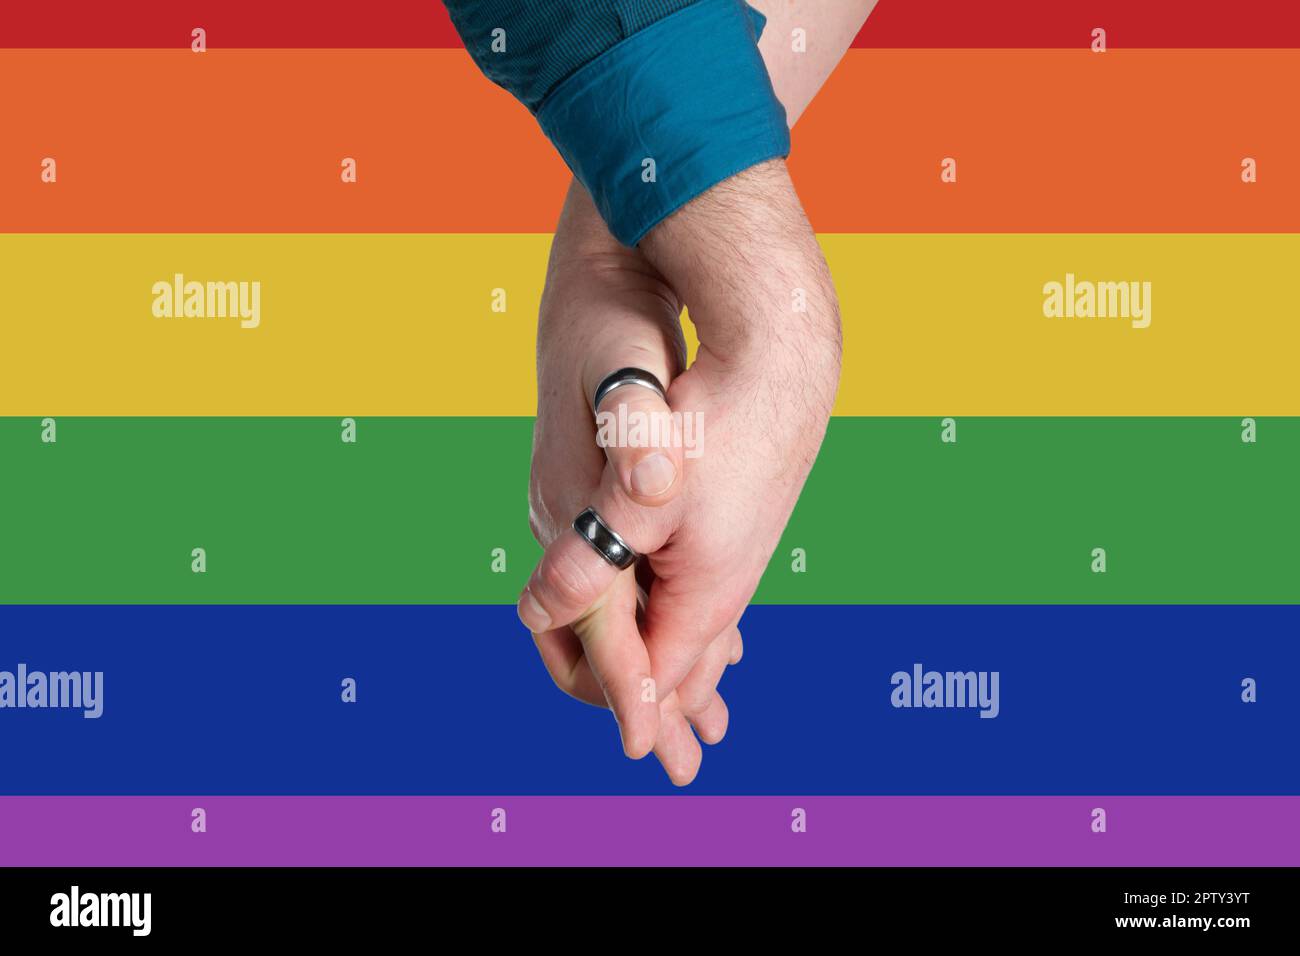 Homosexual couple hands into each other on rainbow flag background Stock Photo